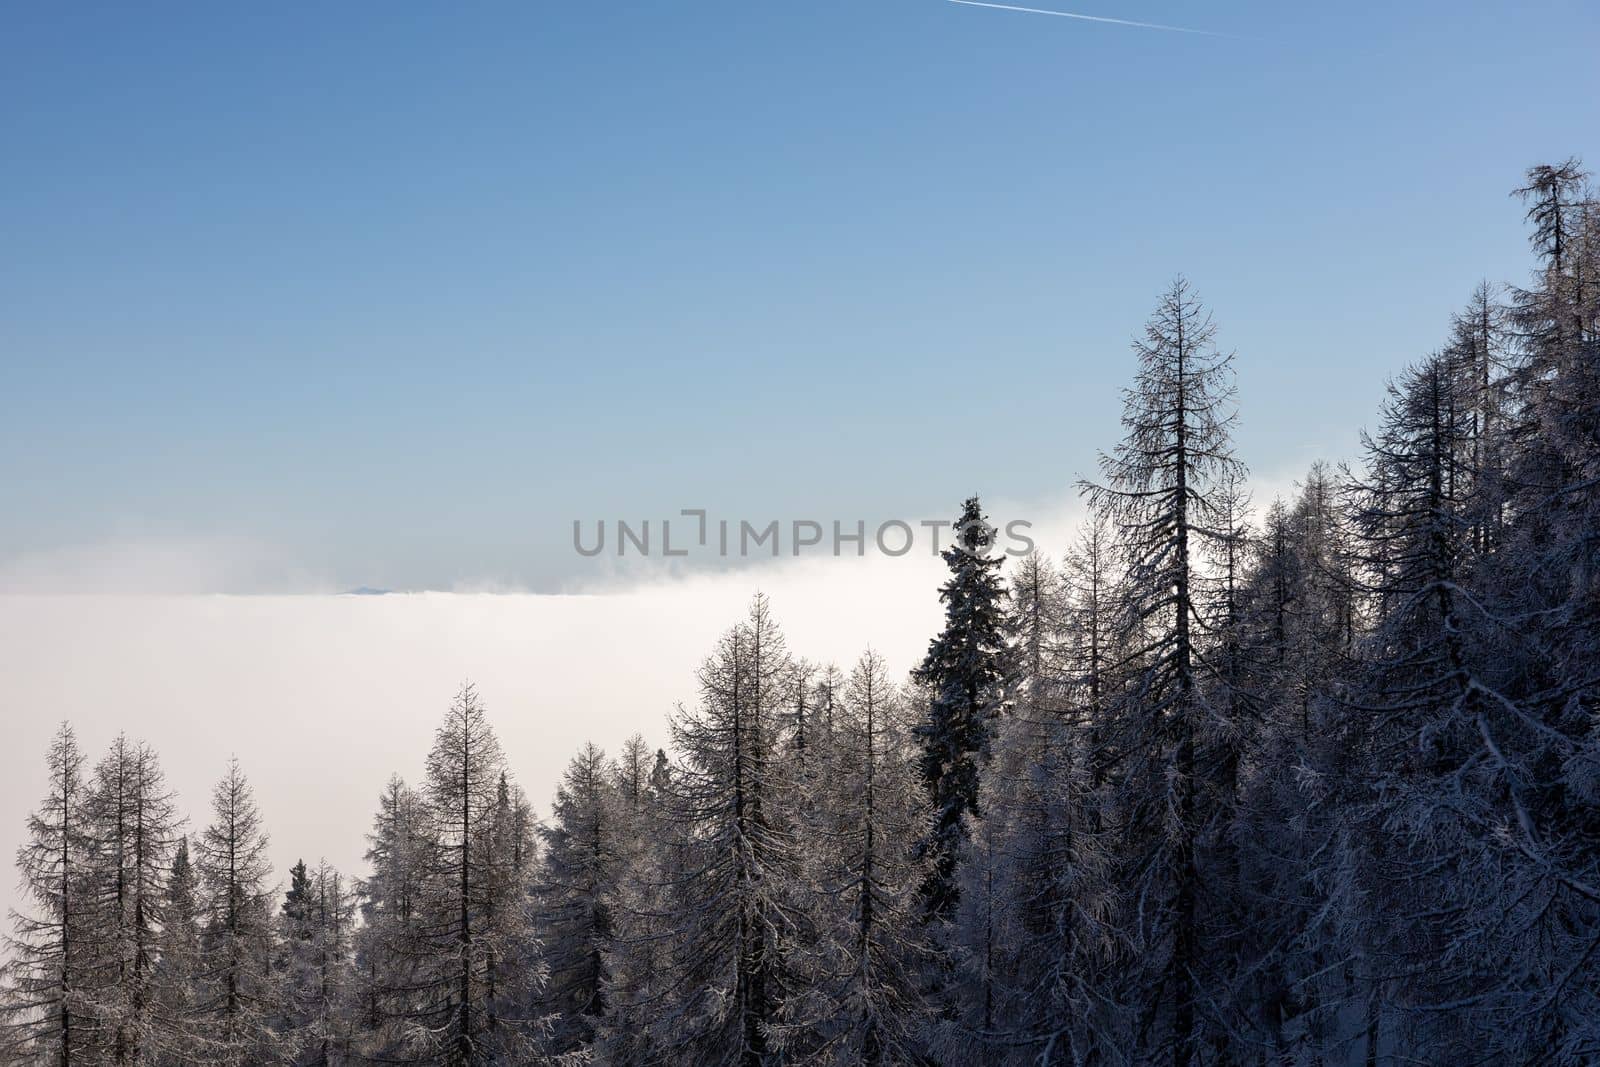 winter mountain landscape peaks and trees snow covered by Chechotkin